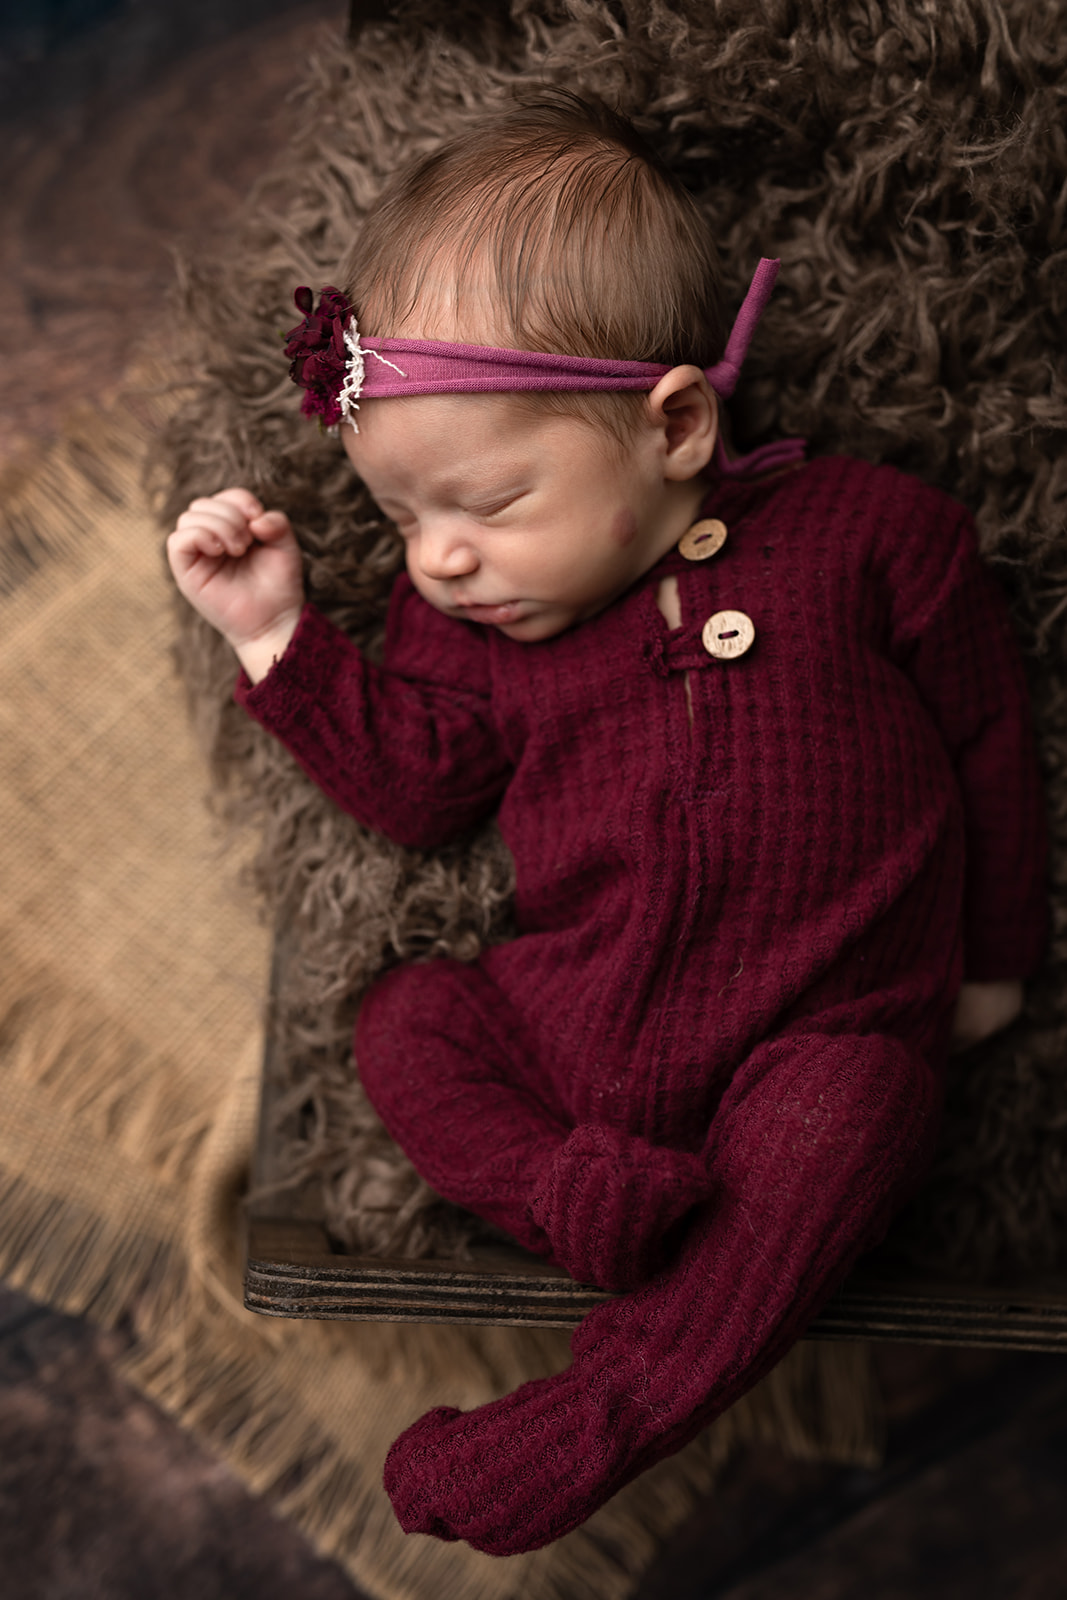 A newborn baby in a purple knit onesie lays on a bed of blankets Little Bellies Cleveland